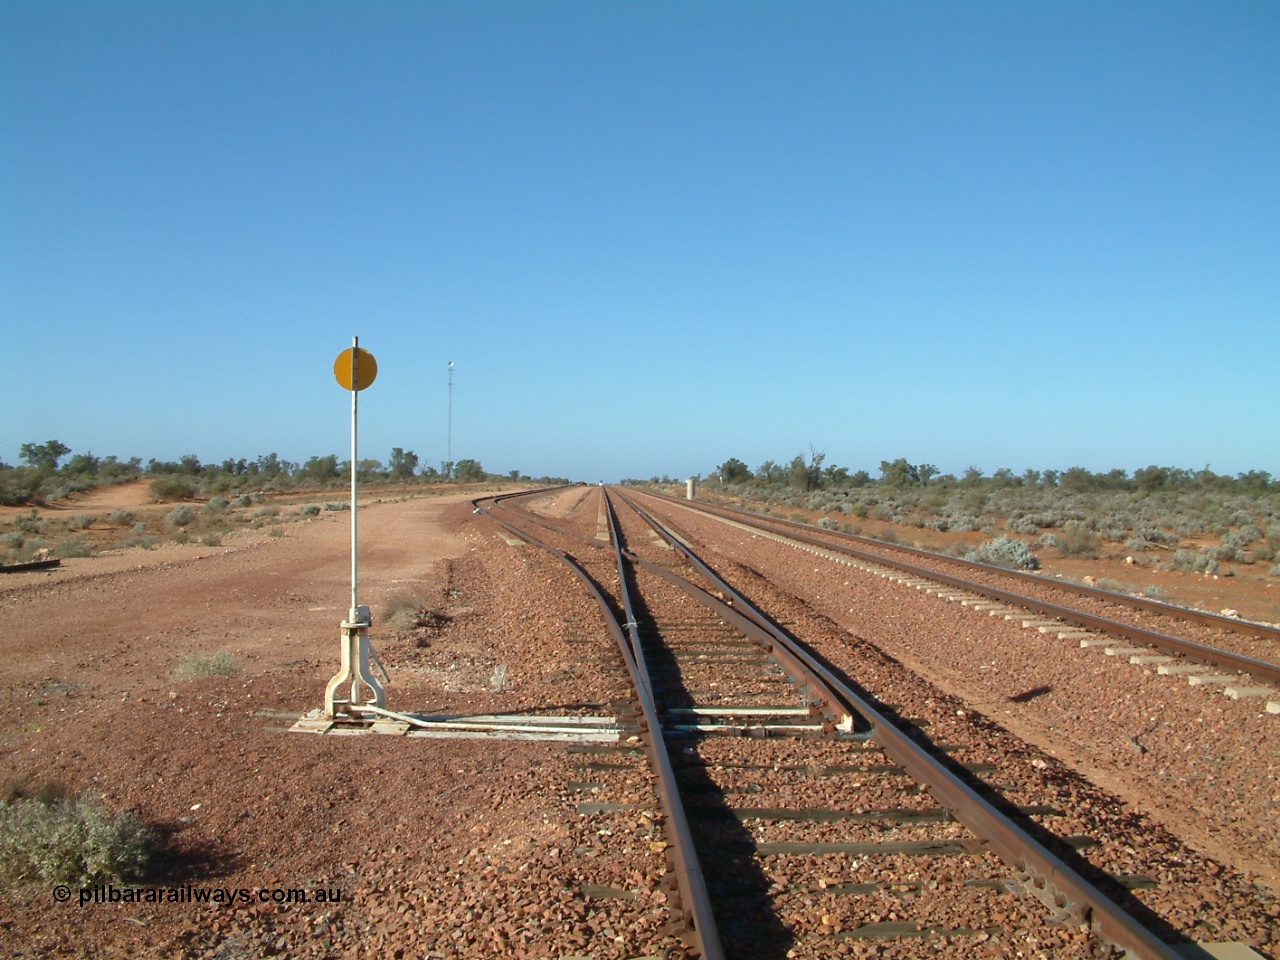 030416 084242
Carnes Siding located at the 566.4 km on the Central Australian line from Tarcoola to Alice Springs. View looking south from the north end of the goods siding rejoining the loop and the mainline at right. The train control 'pillbox' concrete hut is visible with the station nameboard the white item beside it. [url=https://goo.gl/maps/QbycvbbHxJHLg8h87]GeoData location[/url]. 16th April 2003.
